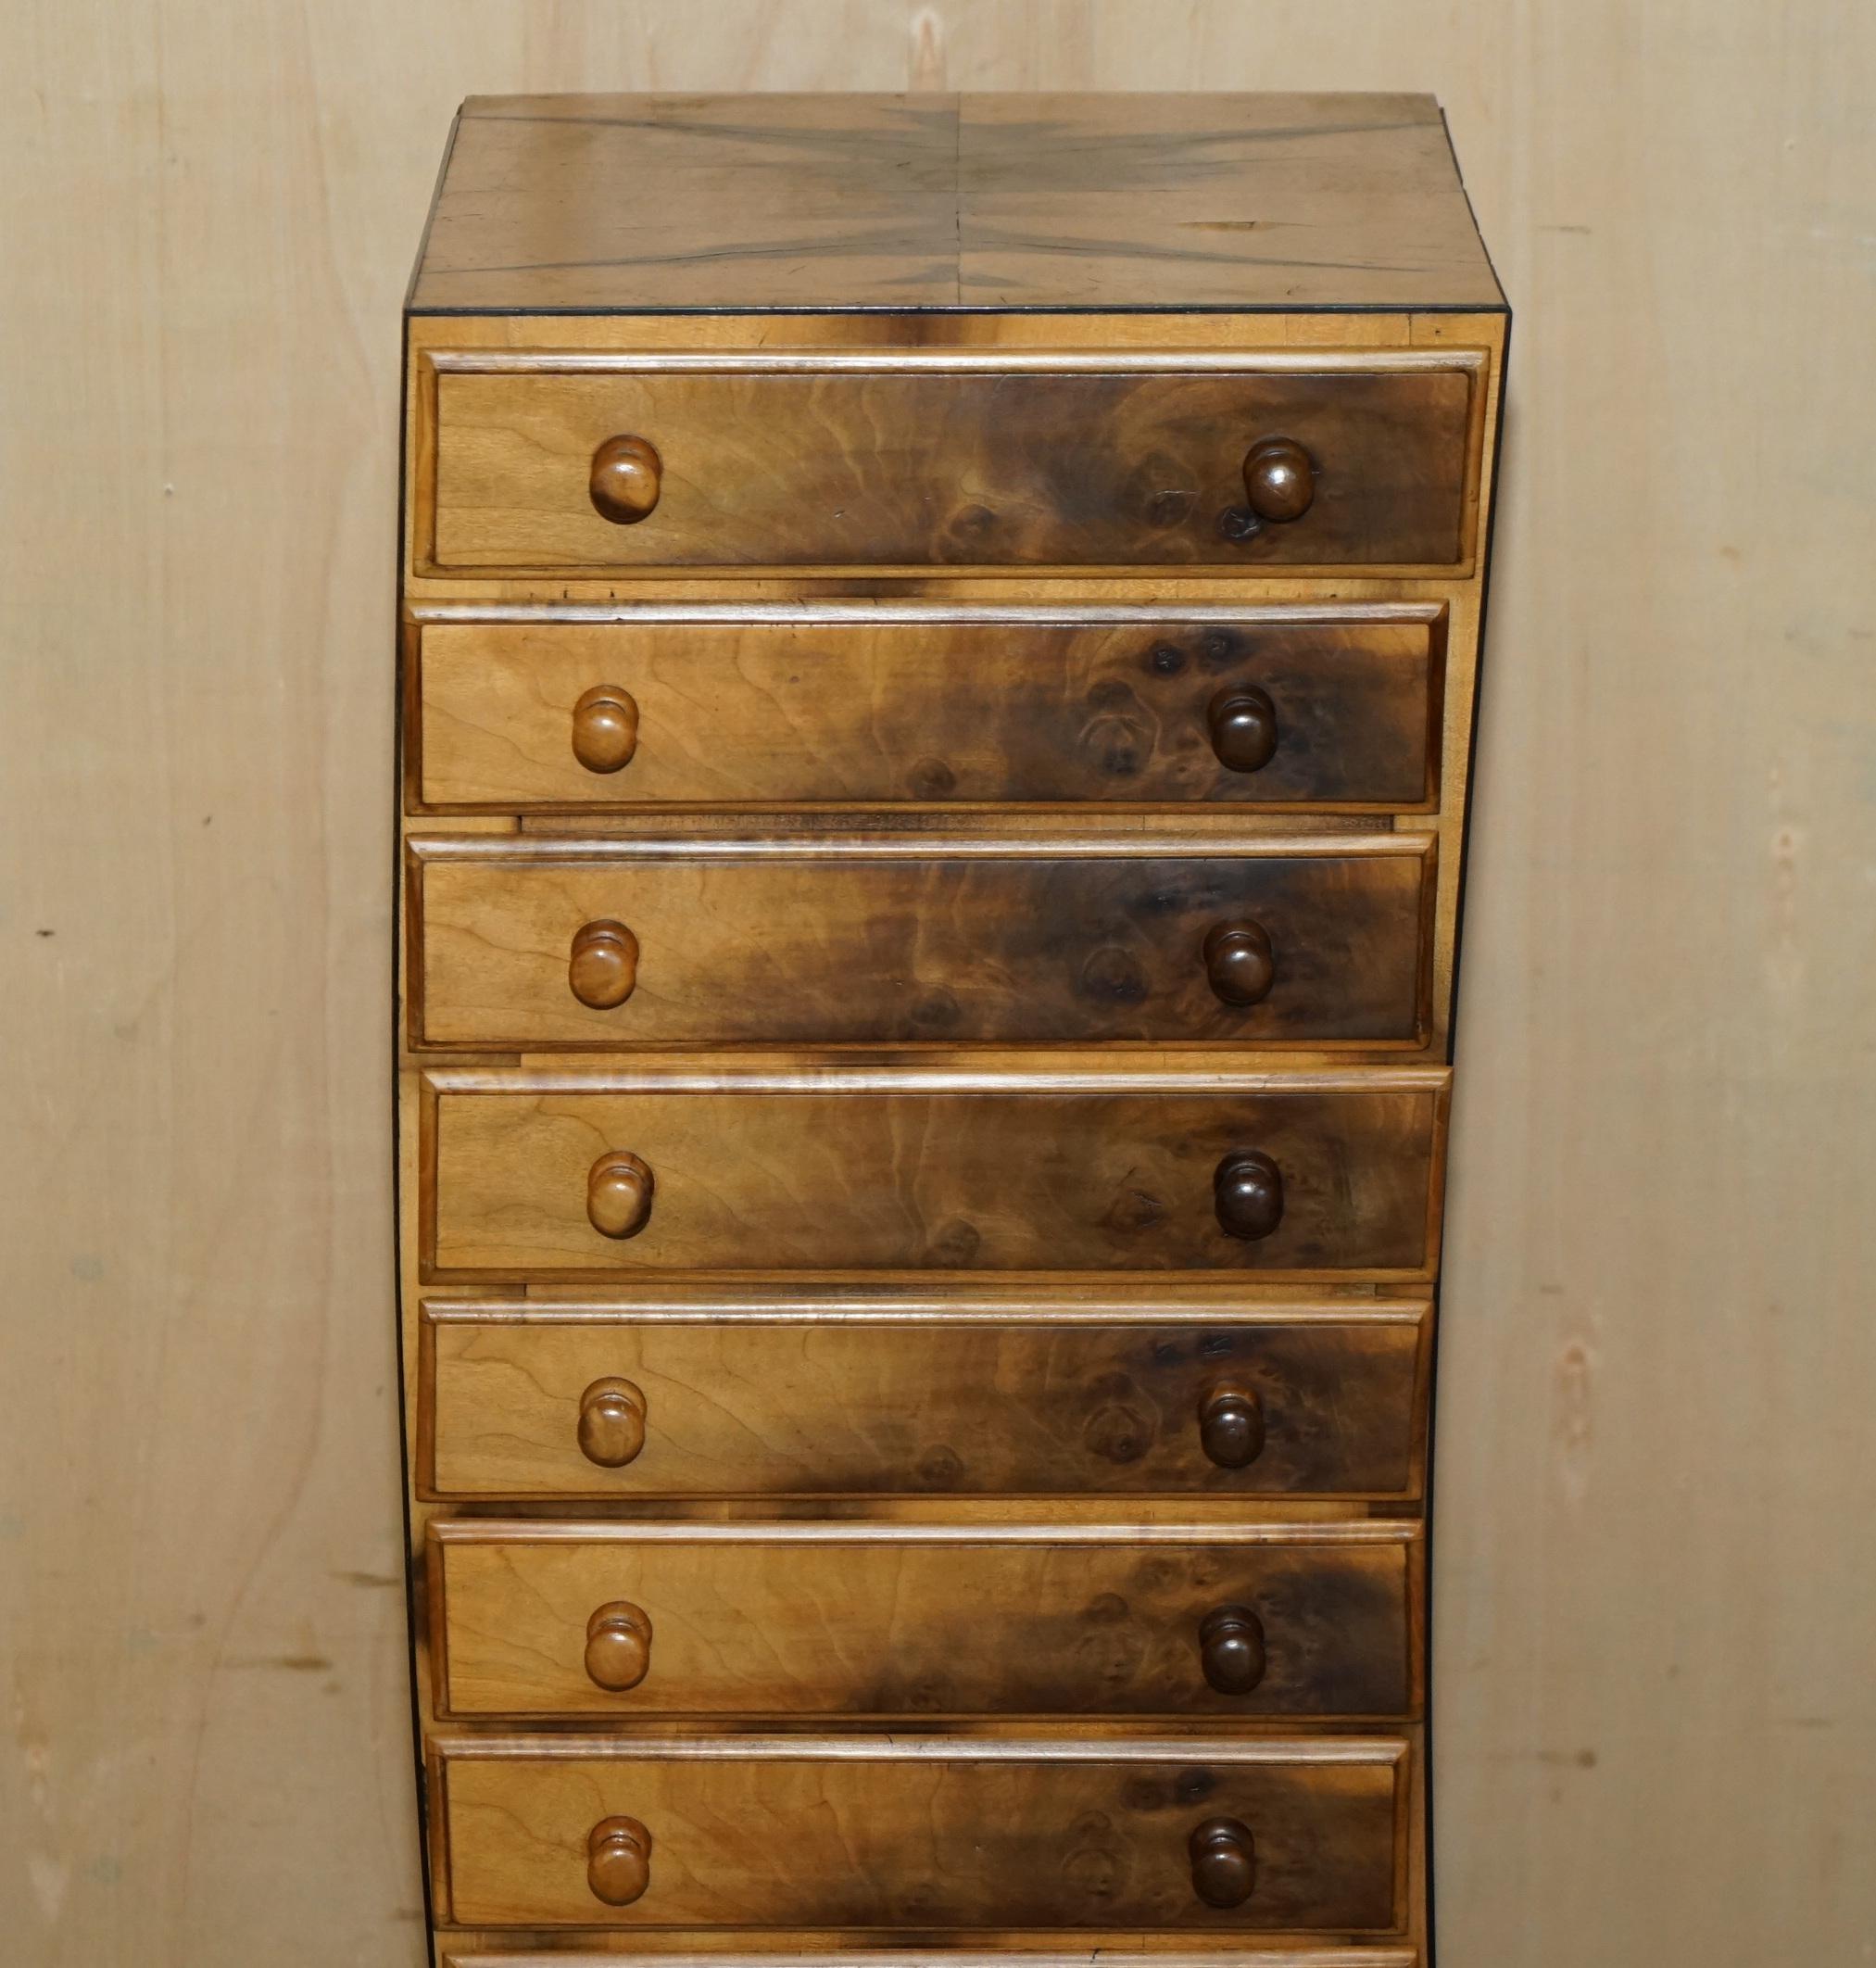 English ALTHORP ESTATE 1.6 METER SERPENTINE GRADUATED DRAWER TALLBOY CHEST OF DRAWERs For Sale